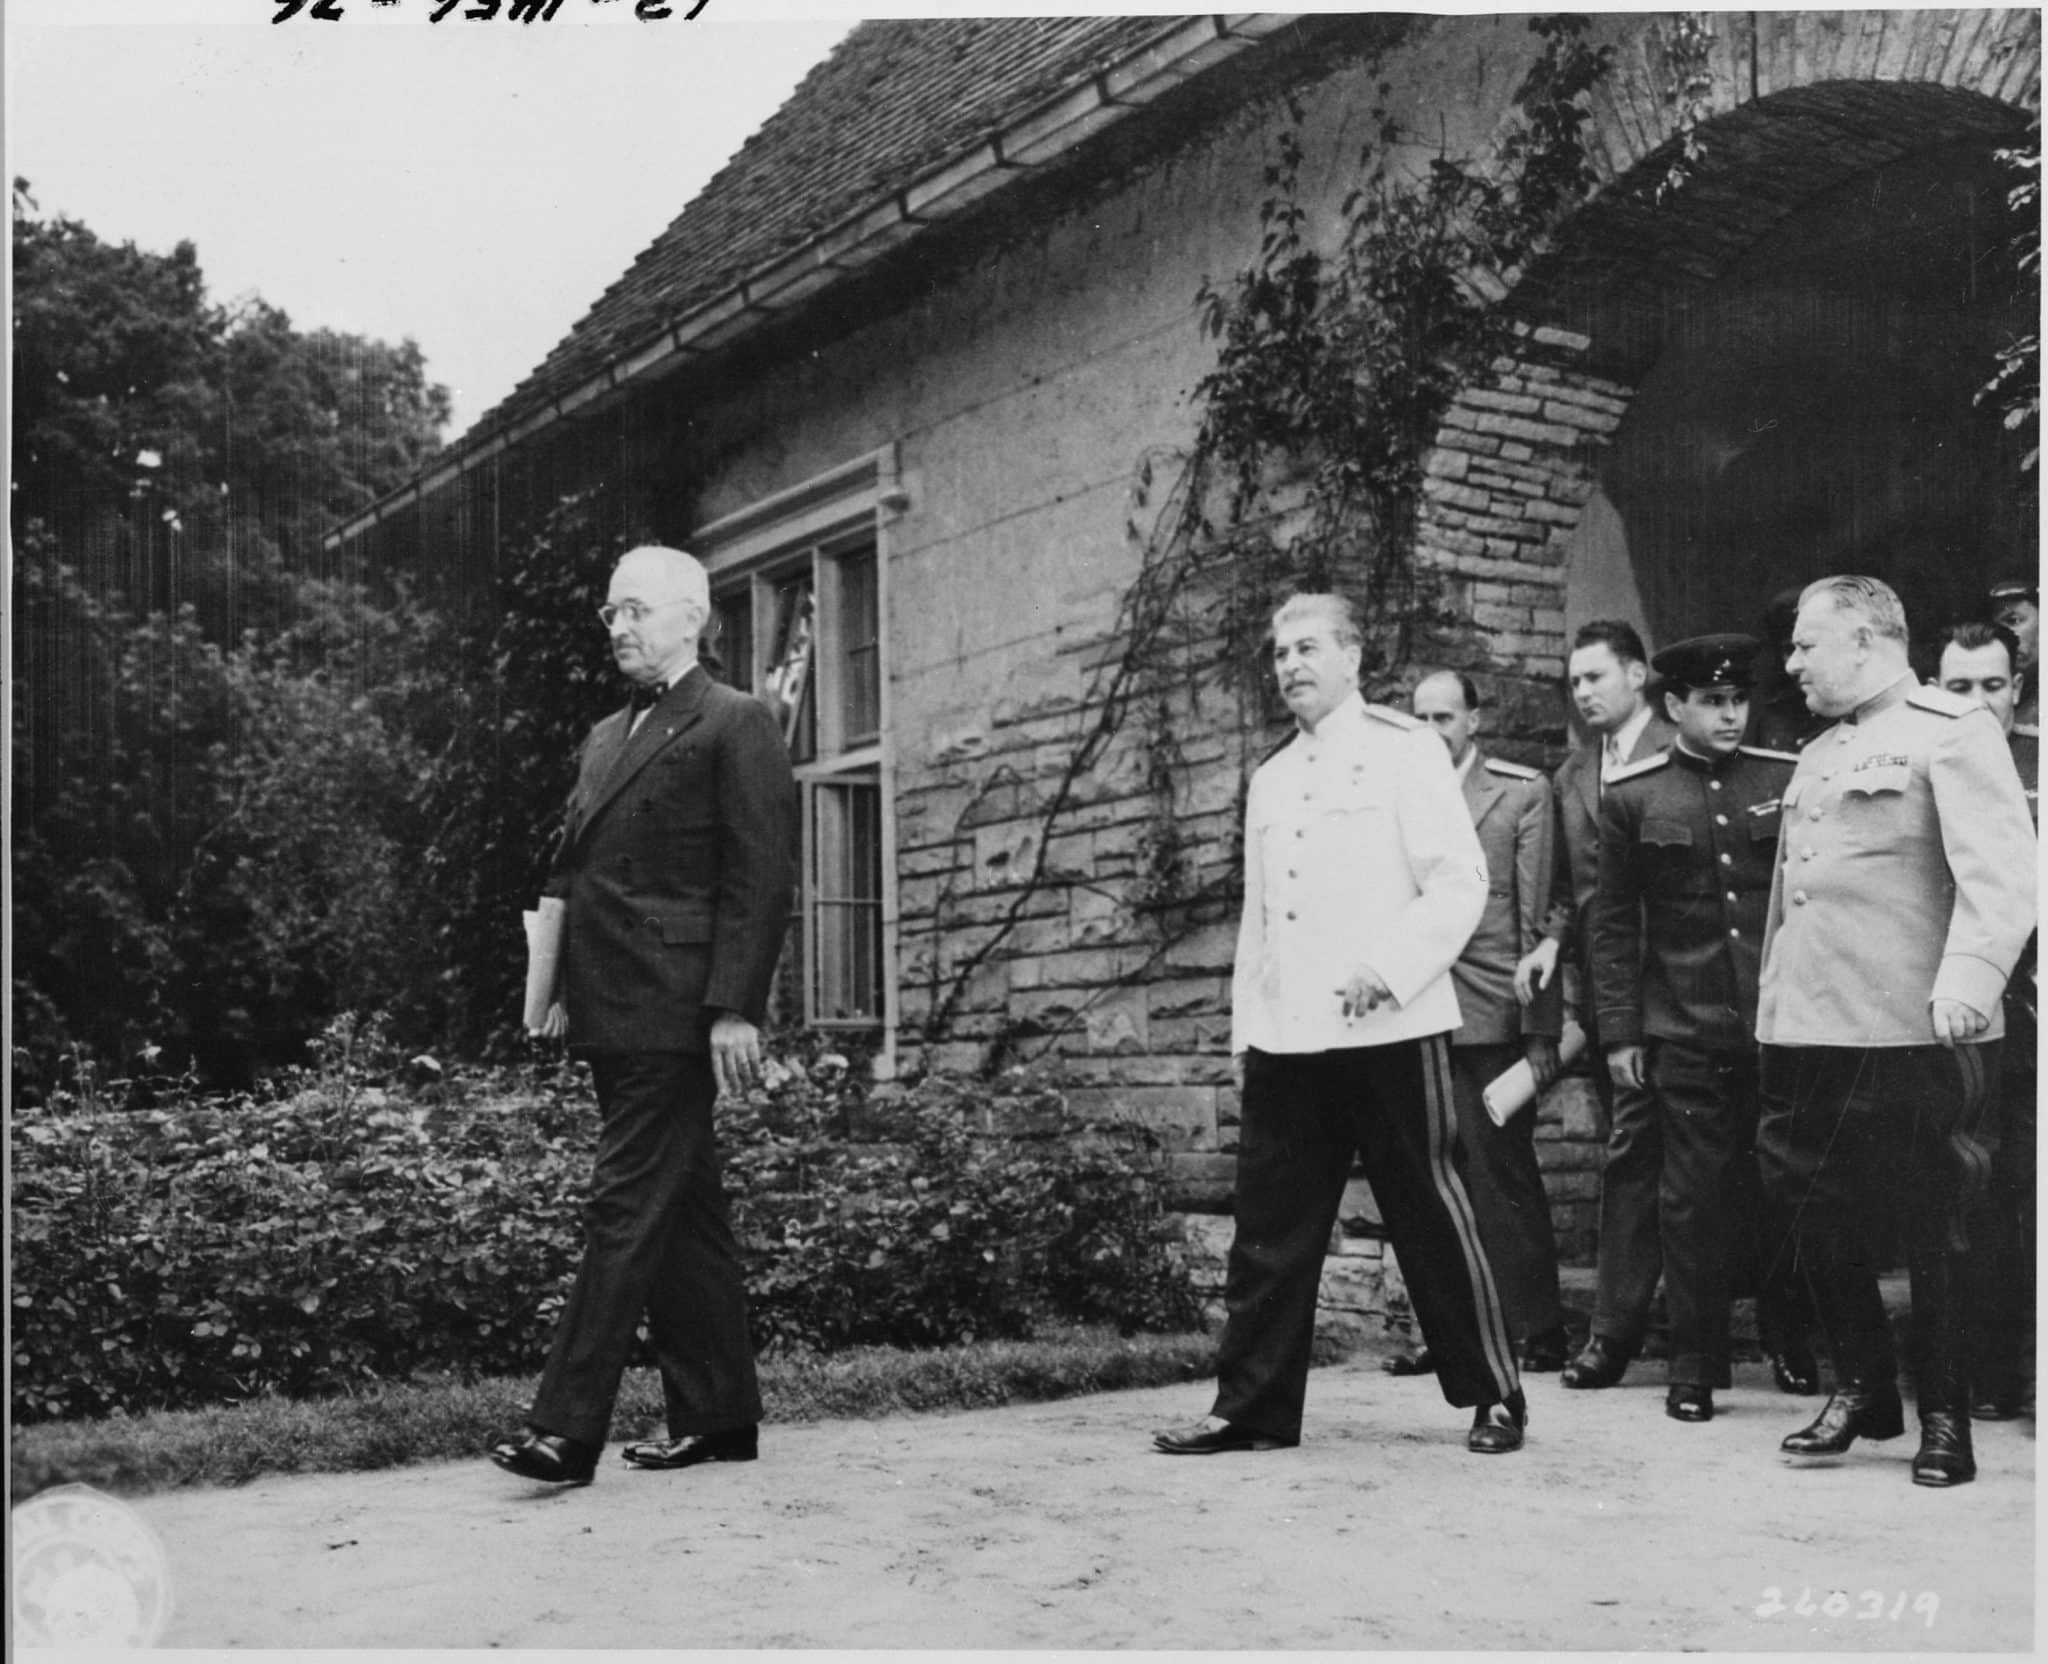 The Potsdam Conference - August 2nd 1945 - Truman and Stalin leave Schloss Cecilienhof and the Potsdam Conference for a final time